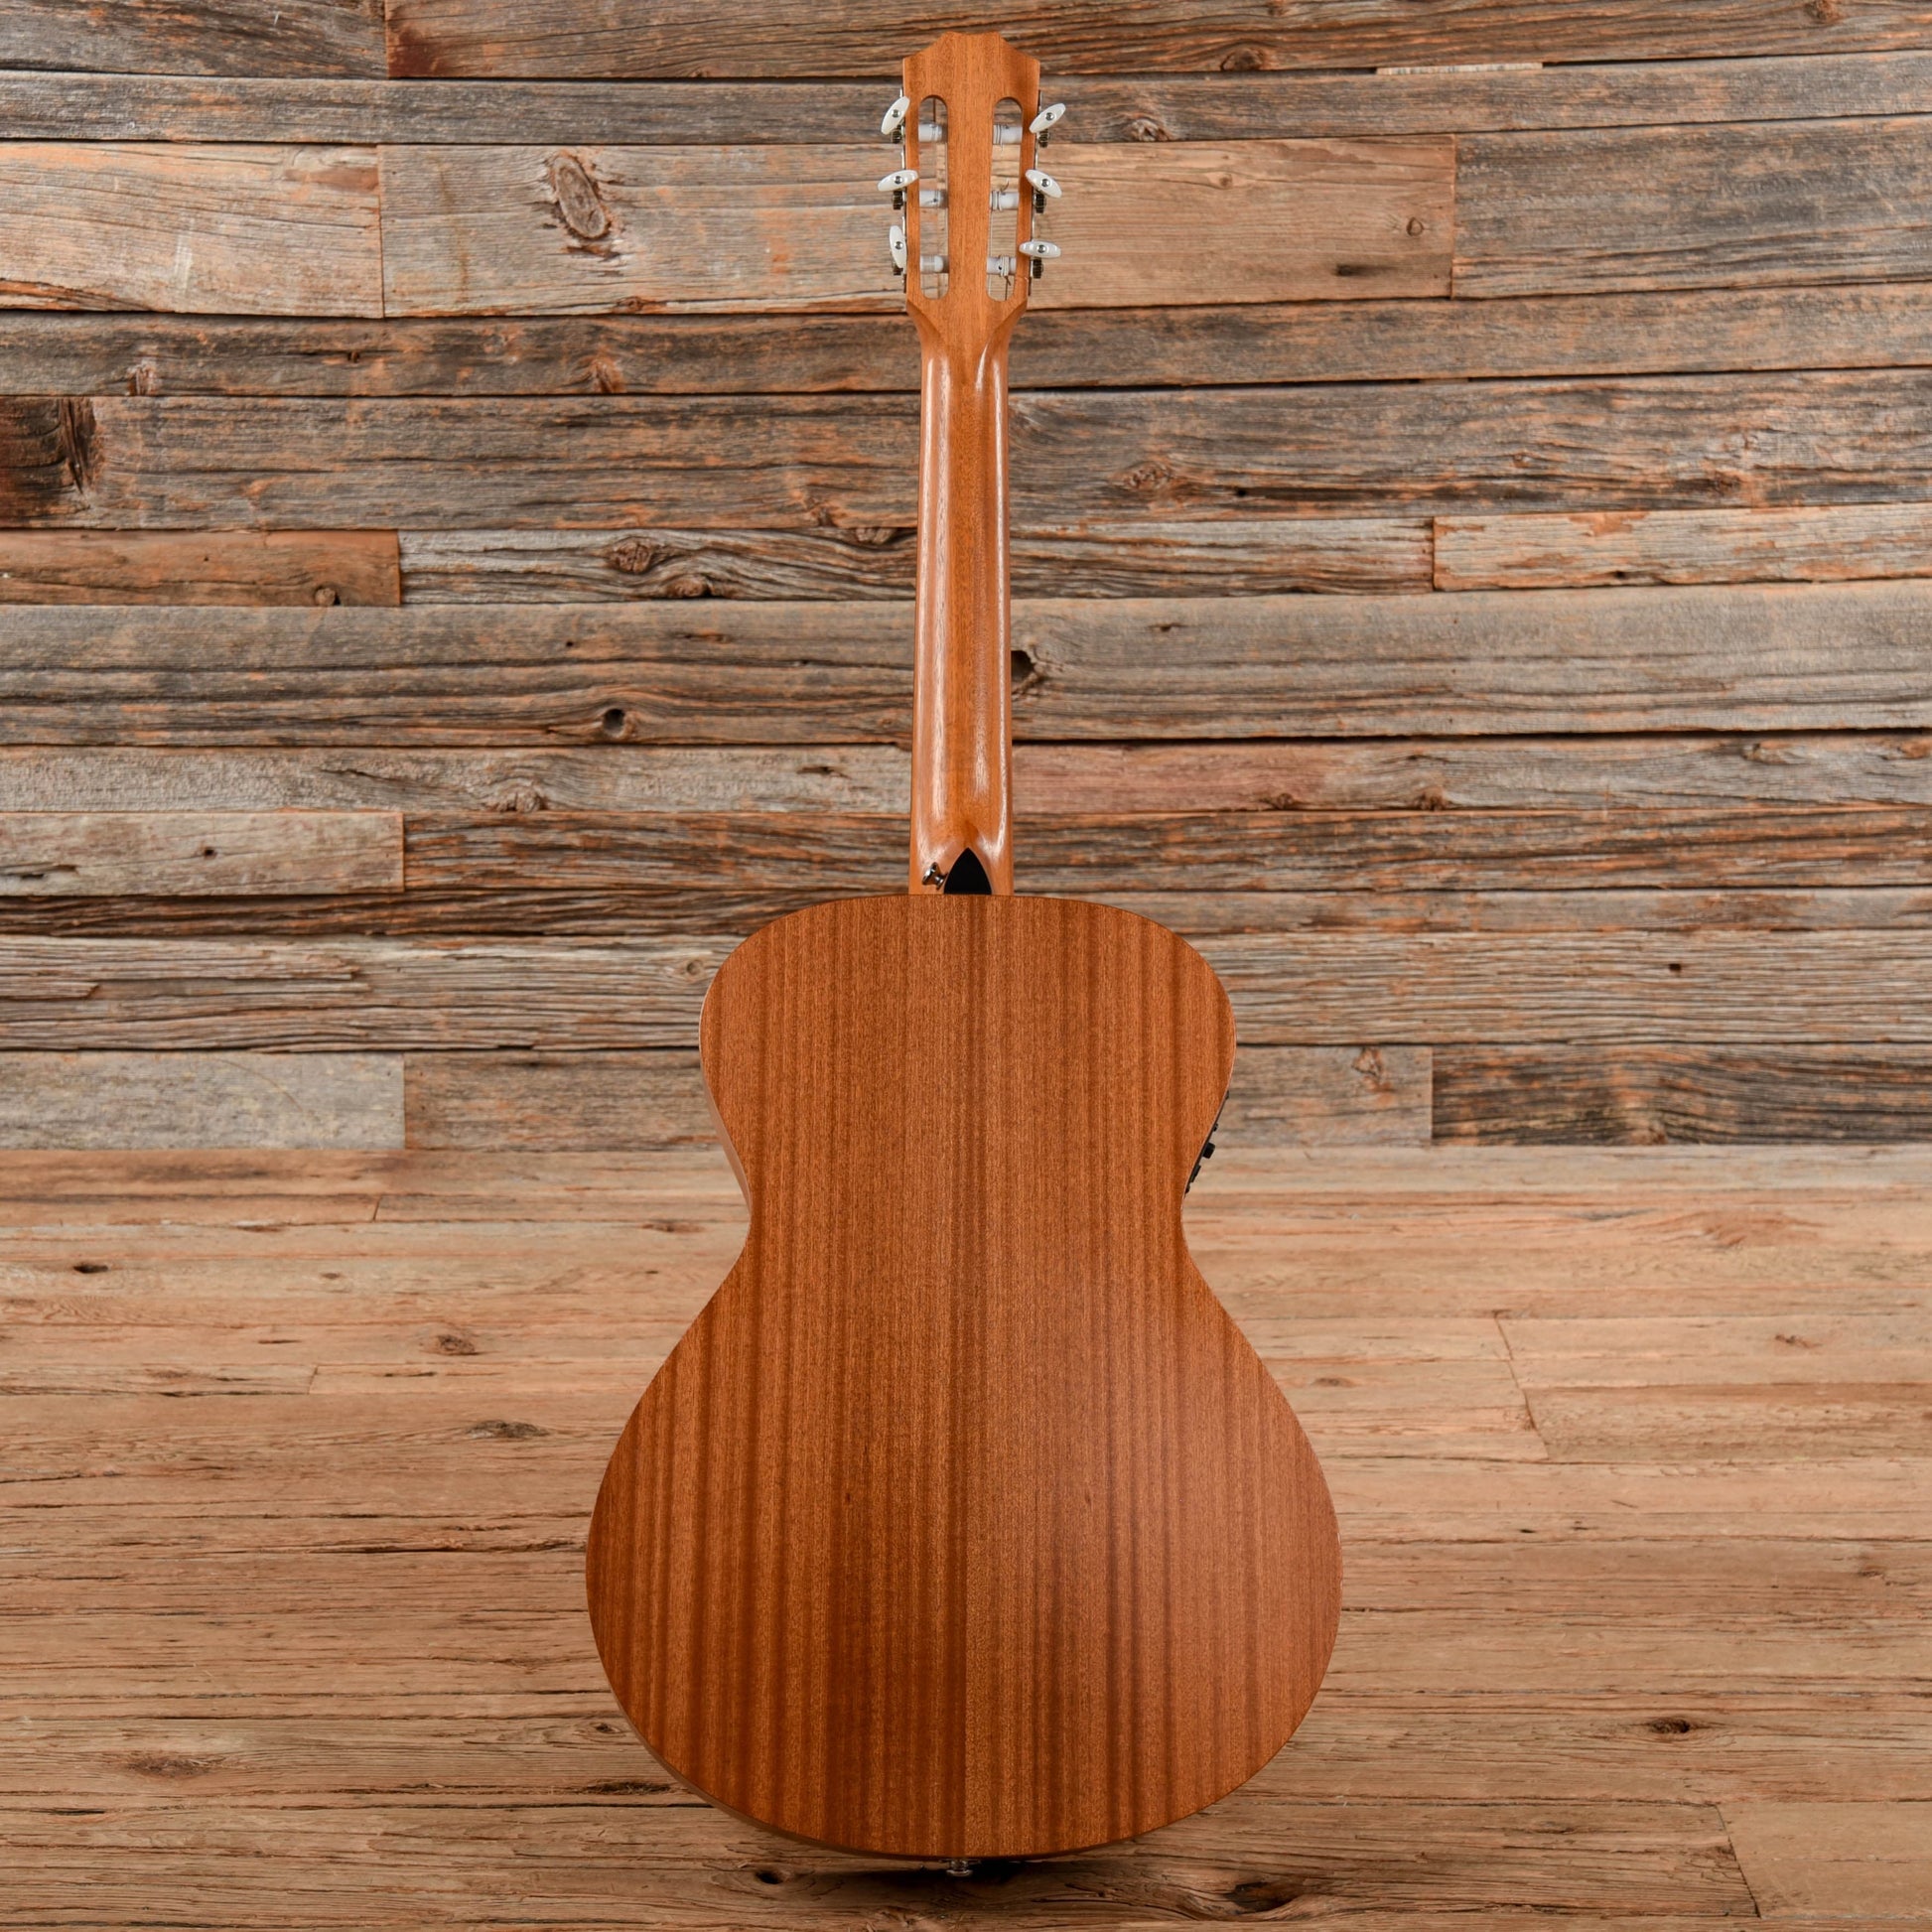 Taylor Academy 12e-N Natural 2019 Acoustic Guitars / Classical